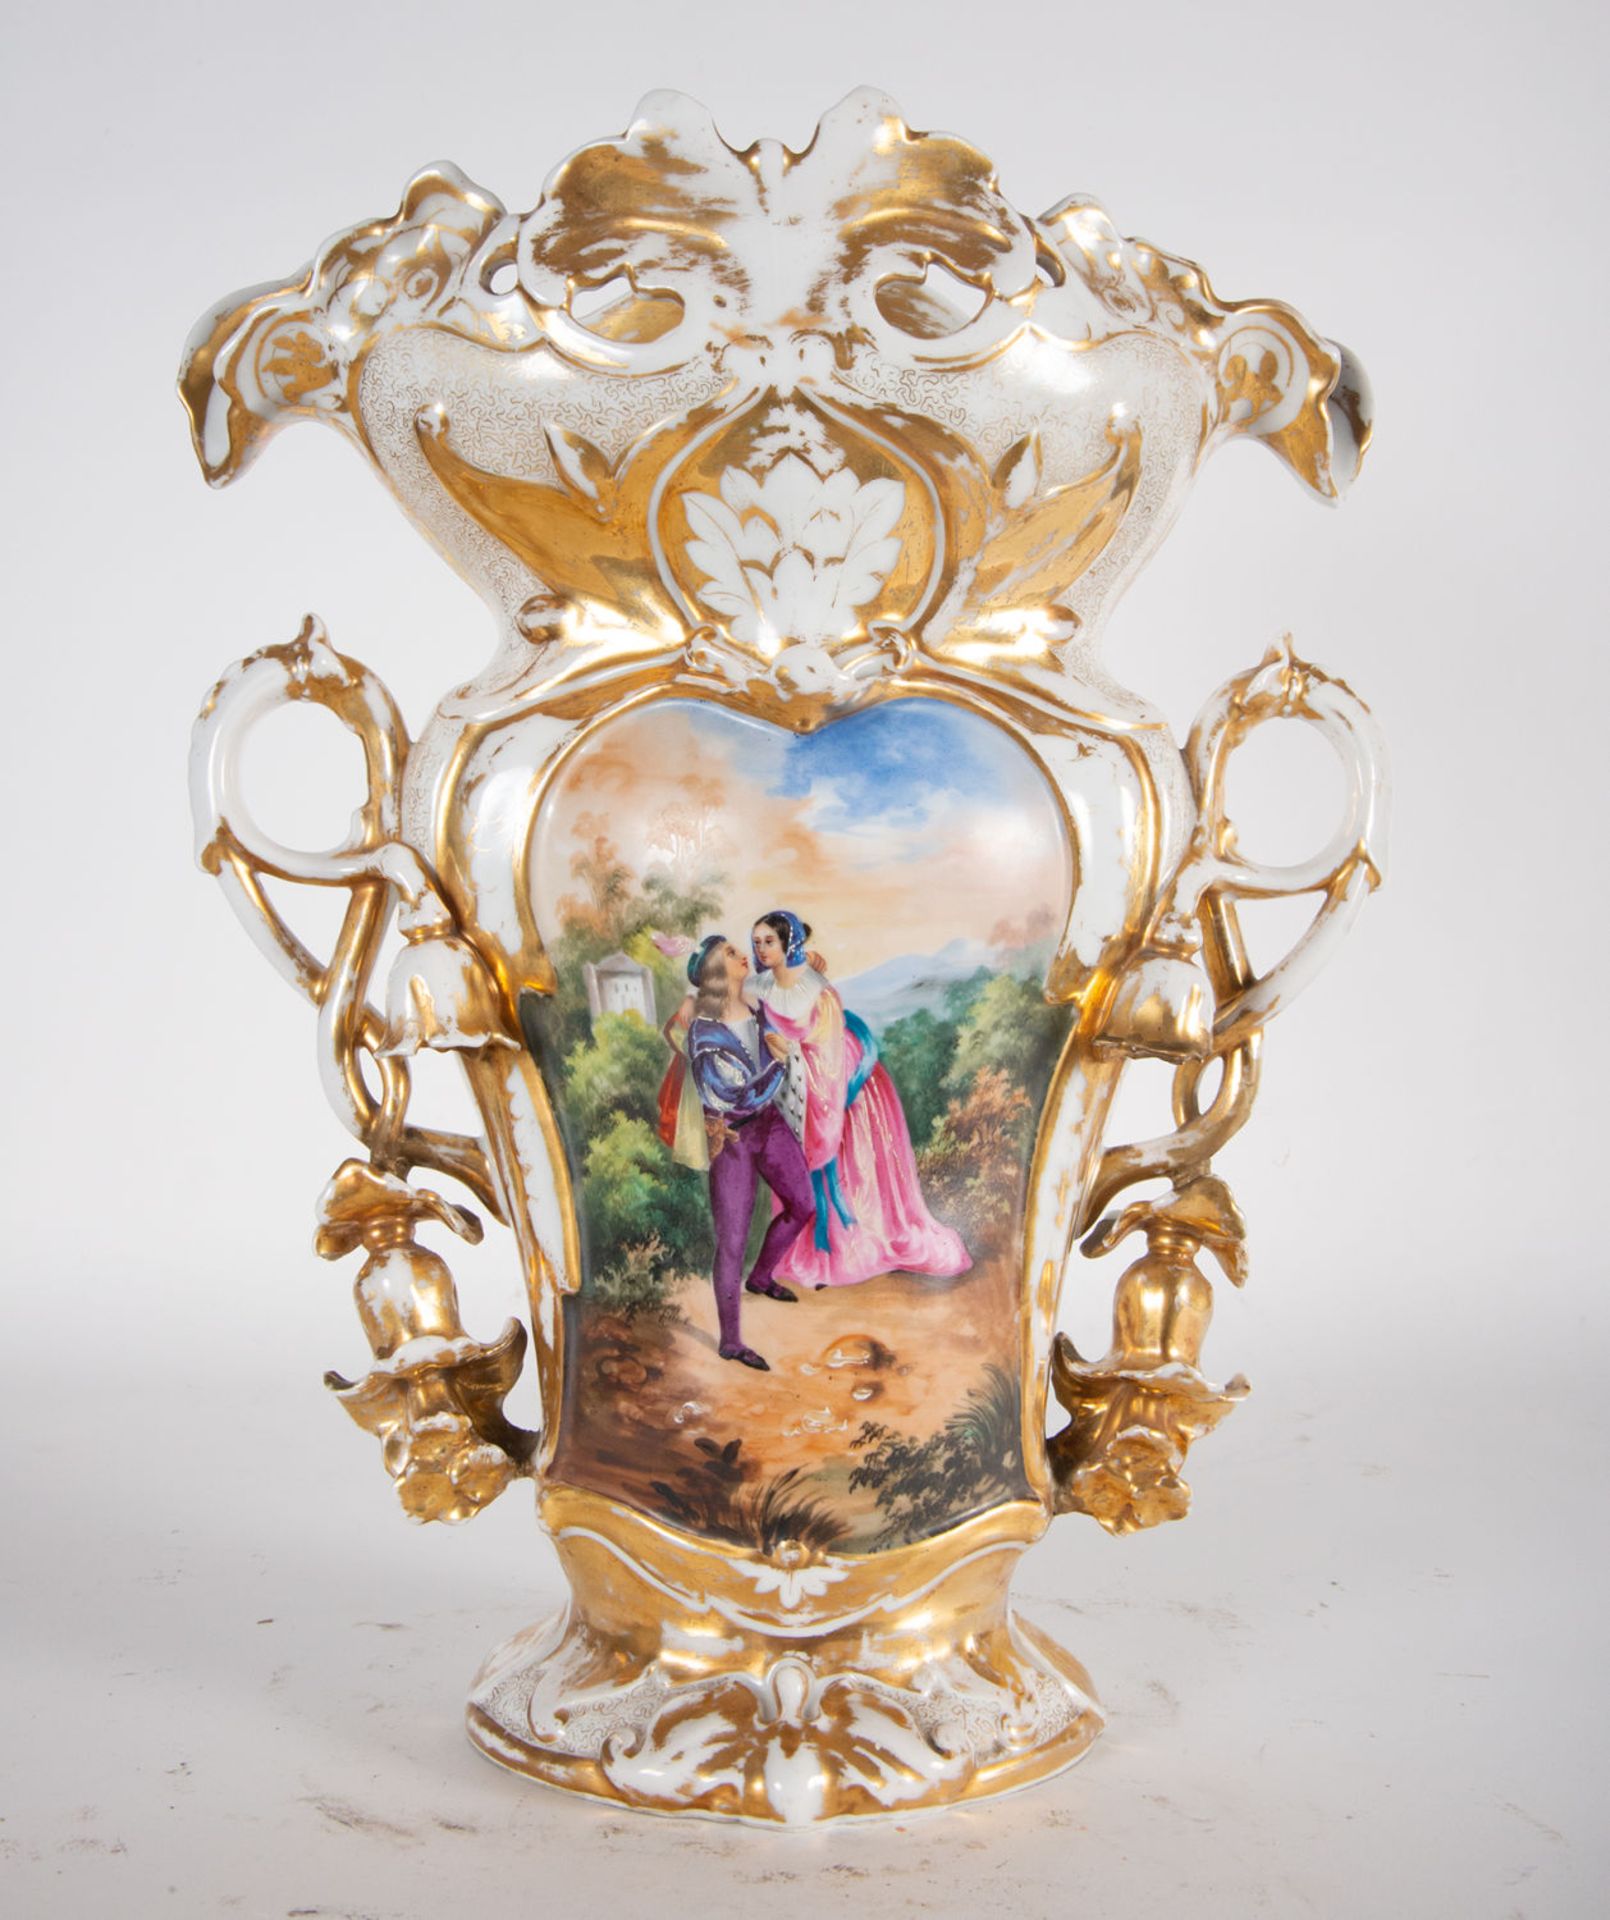 Pair of Elizabethan Vases in enameled and polychrome porcelain, 19th century - Image 6 of 10